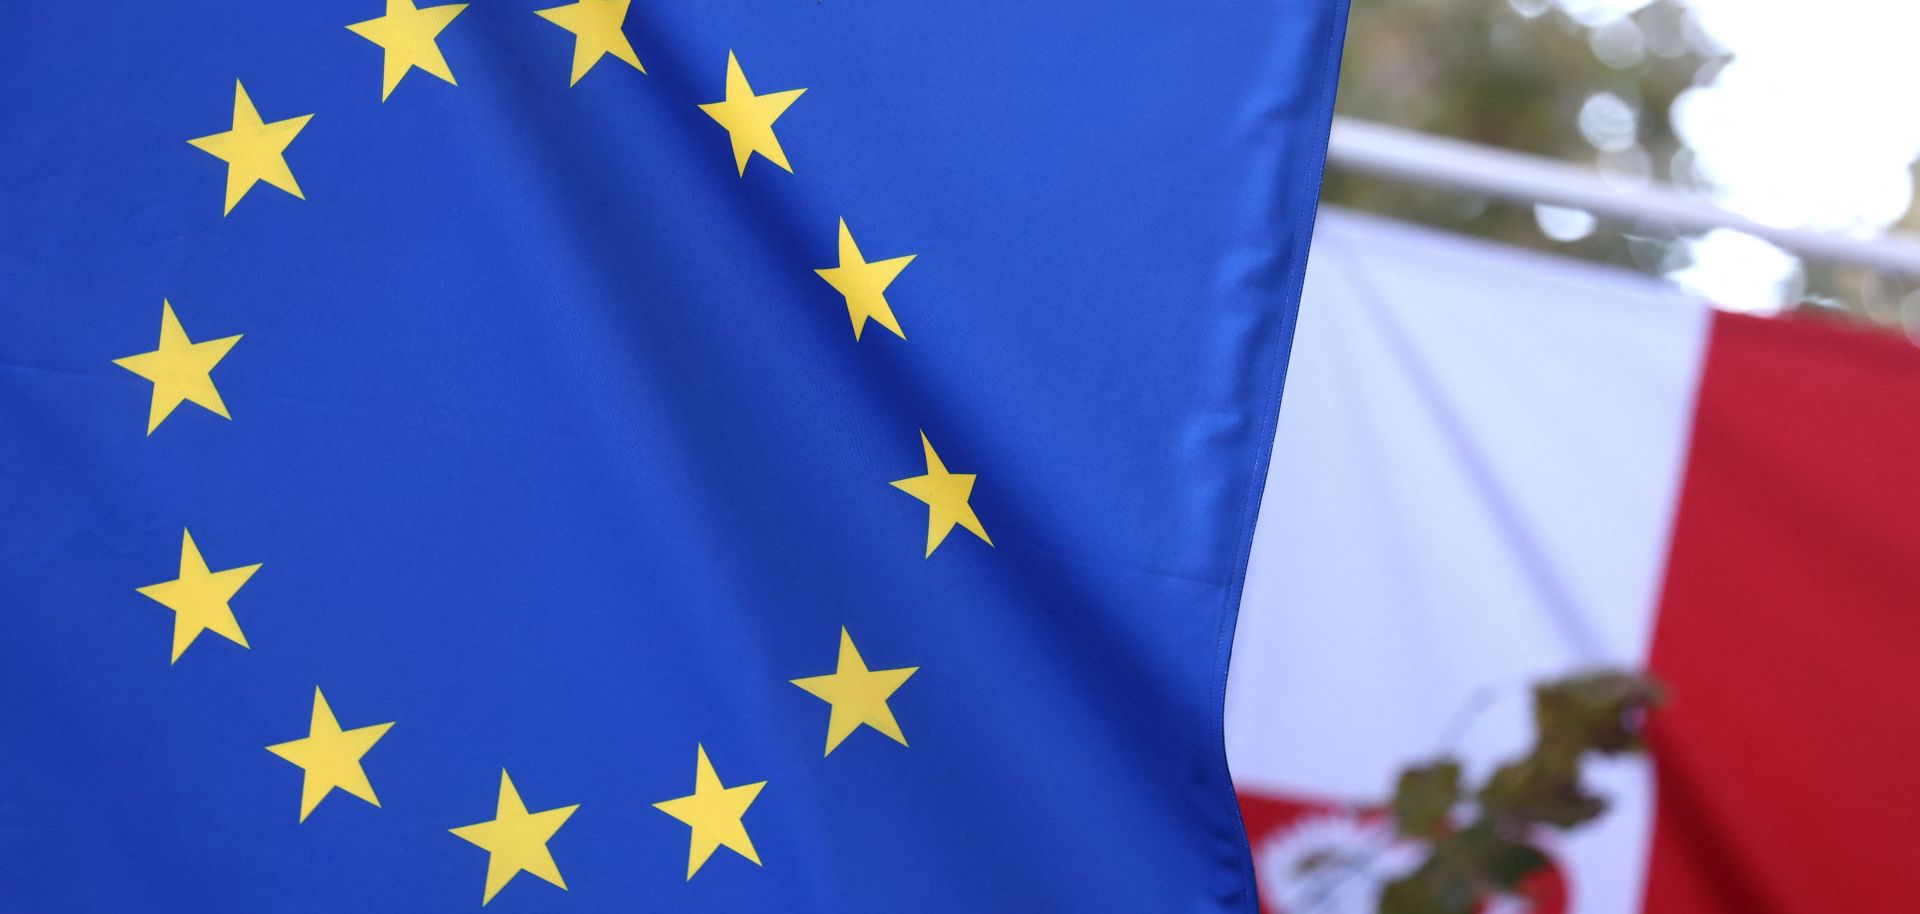 The EU and Polish flags are seen at the entrance of the Polish Permanent Representation to the European Union on Oct. 8, 2021, in Brussels, Belgium. 